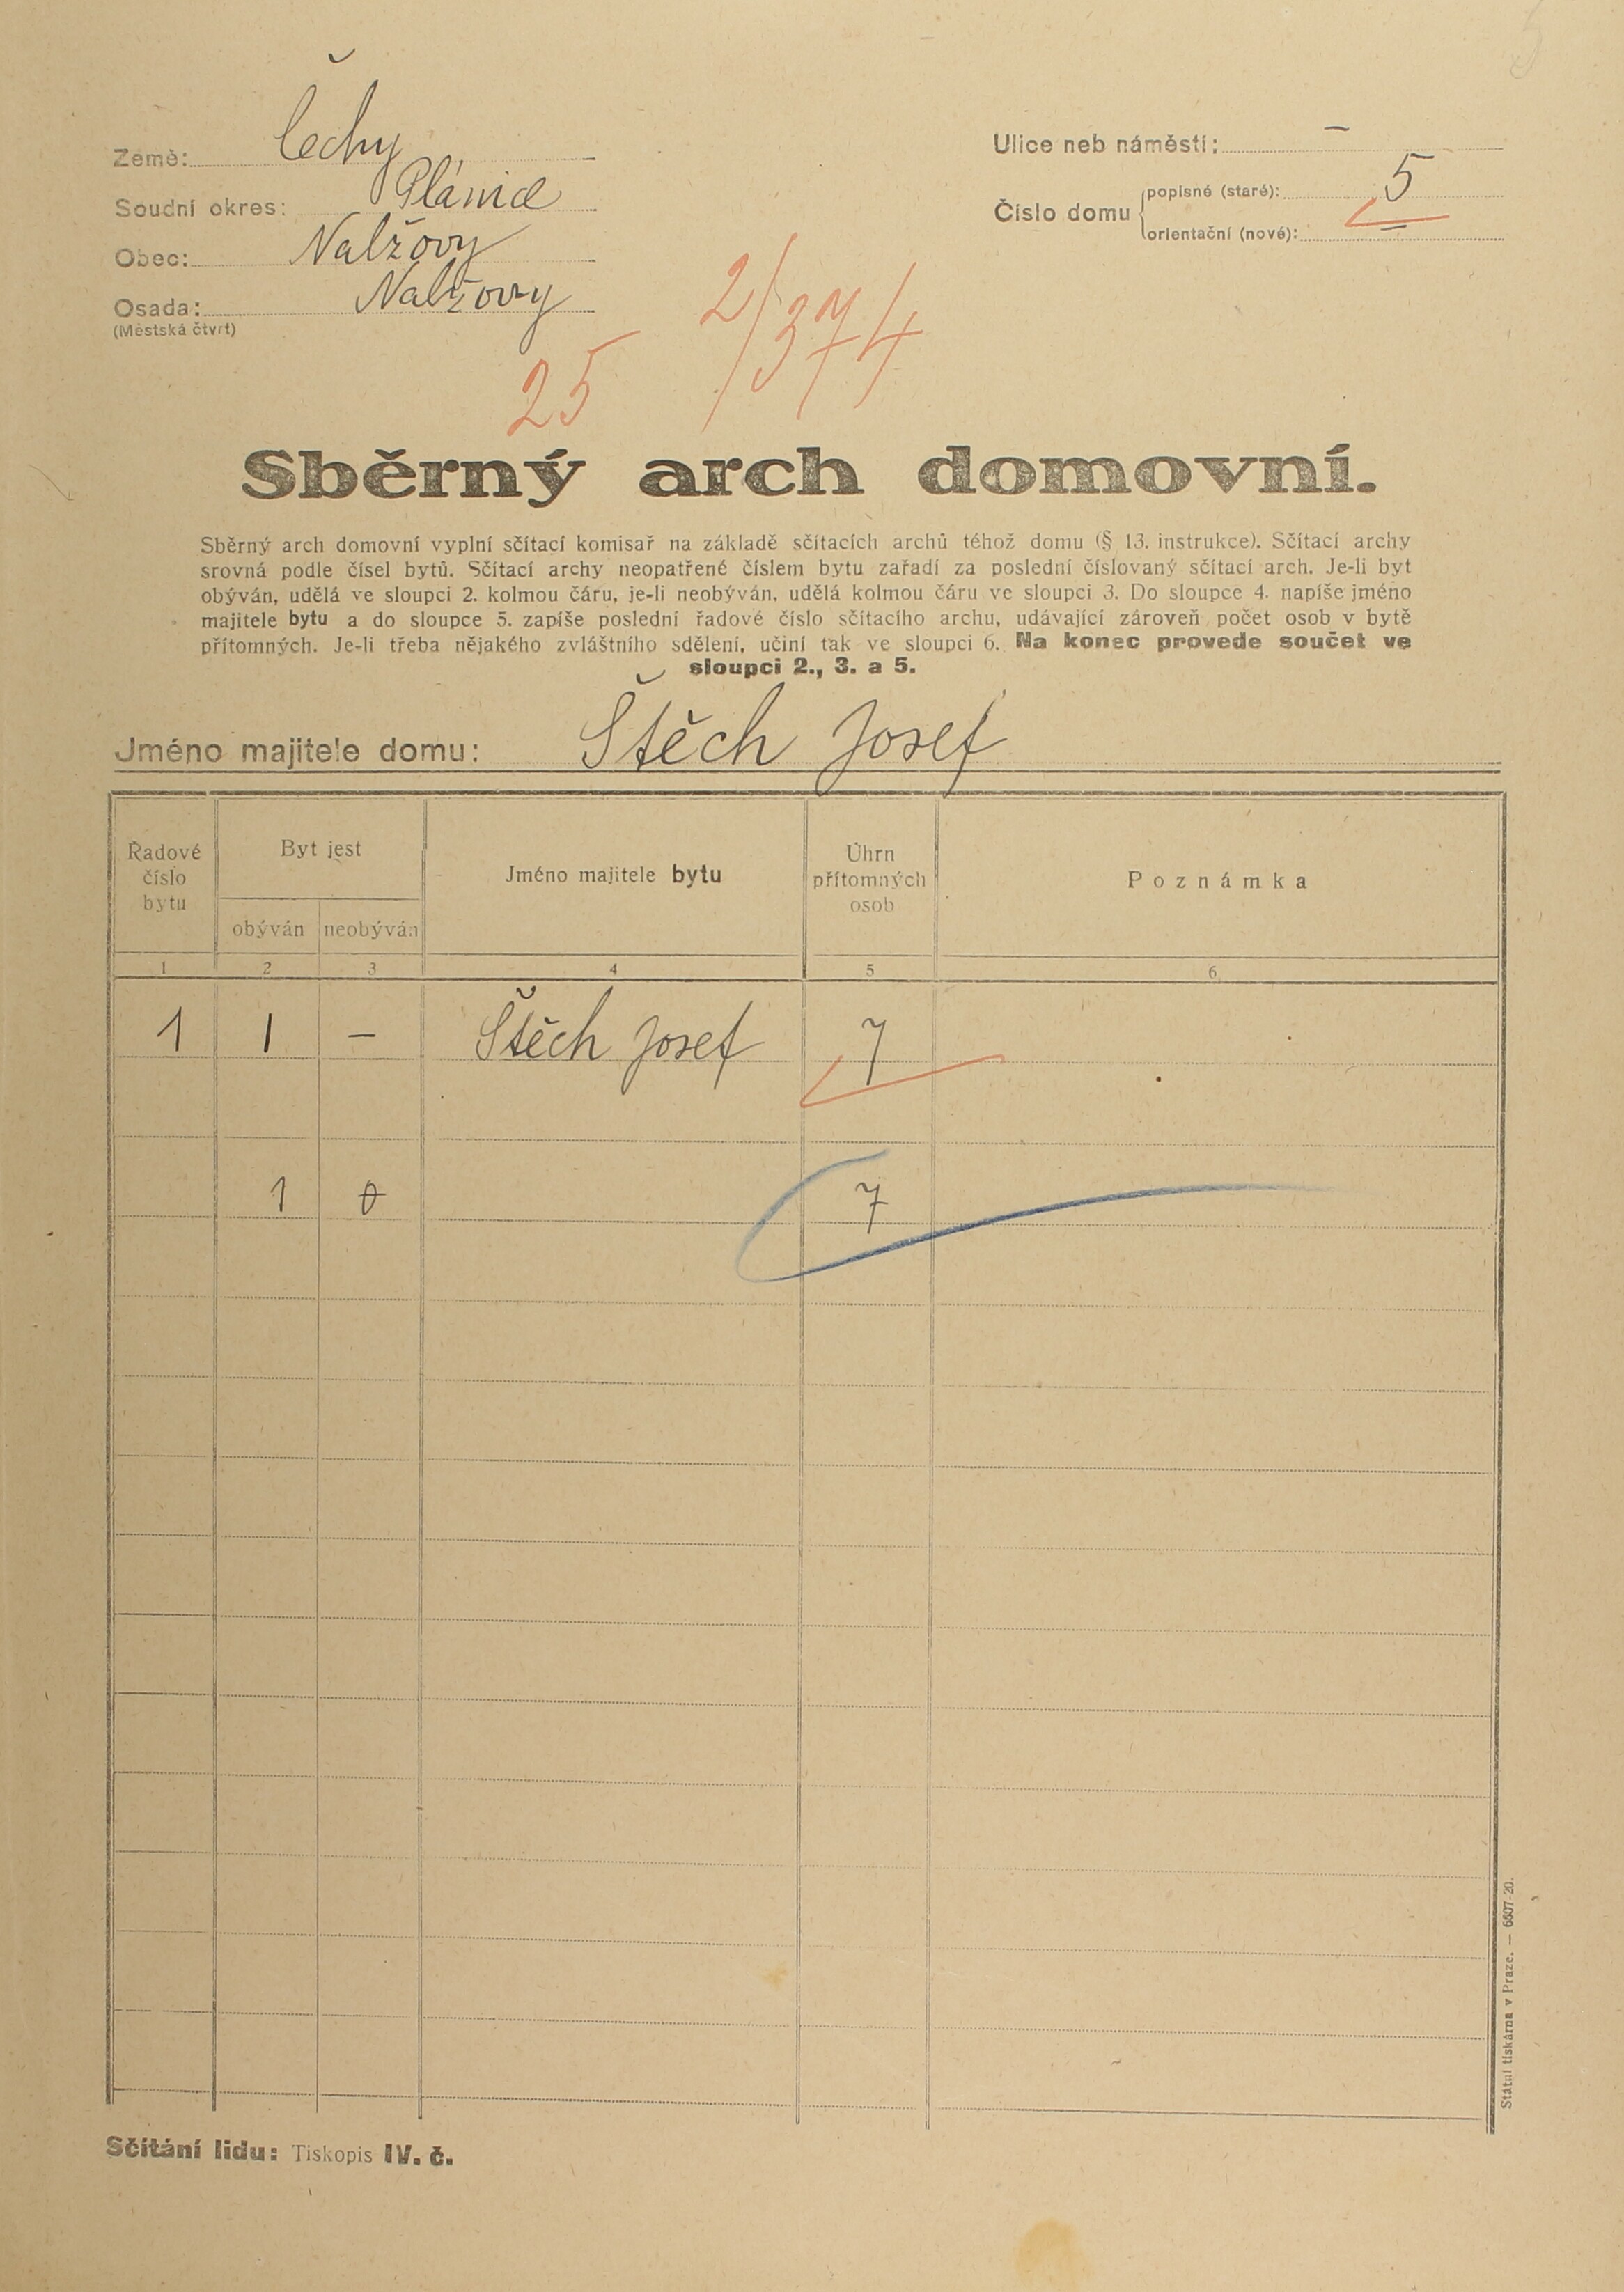 1. soap-kt_01159_census-1921-nalzovy-cp005_0010